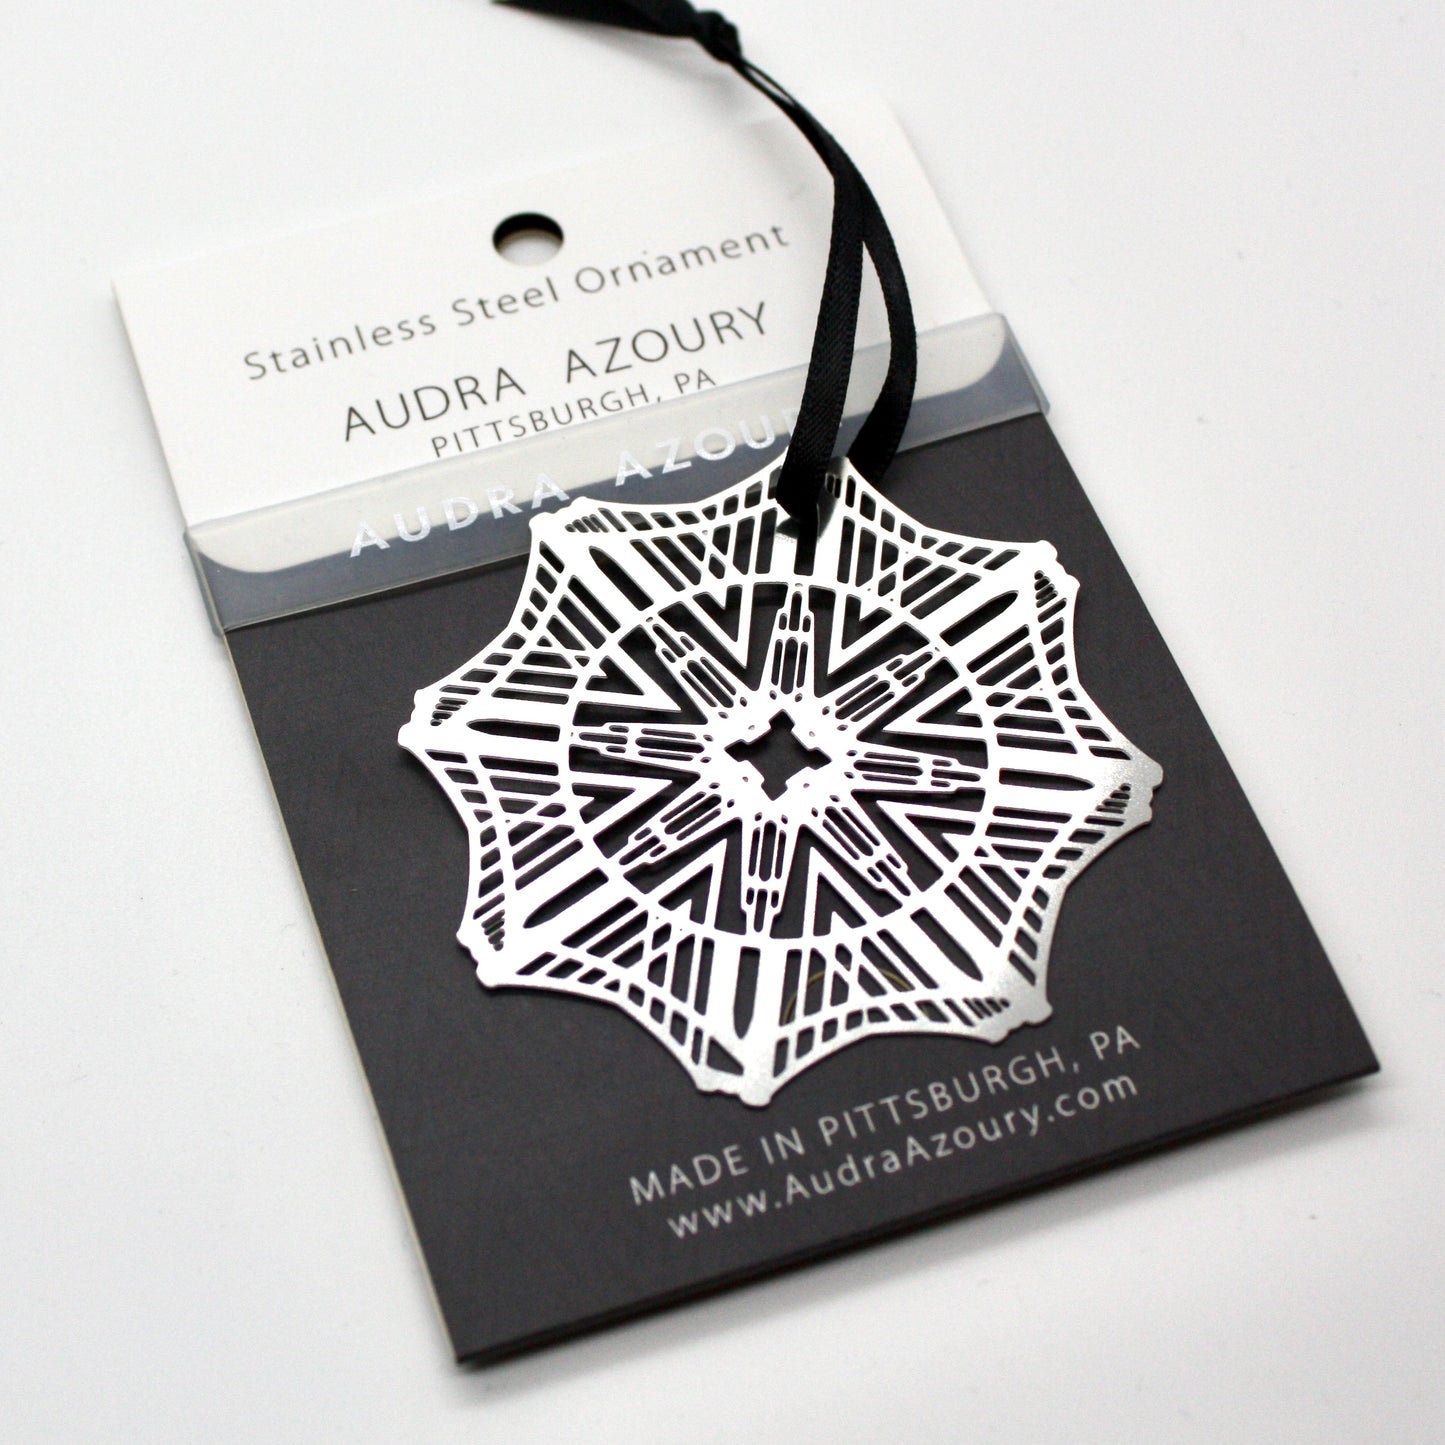 Cathedral & Bridges Snowflake Ornament, Pittsburgh by Audra Azoury